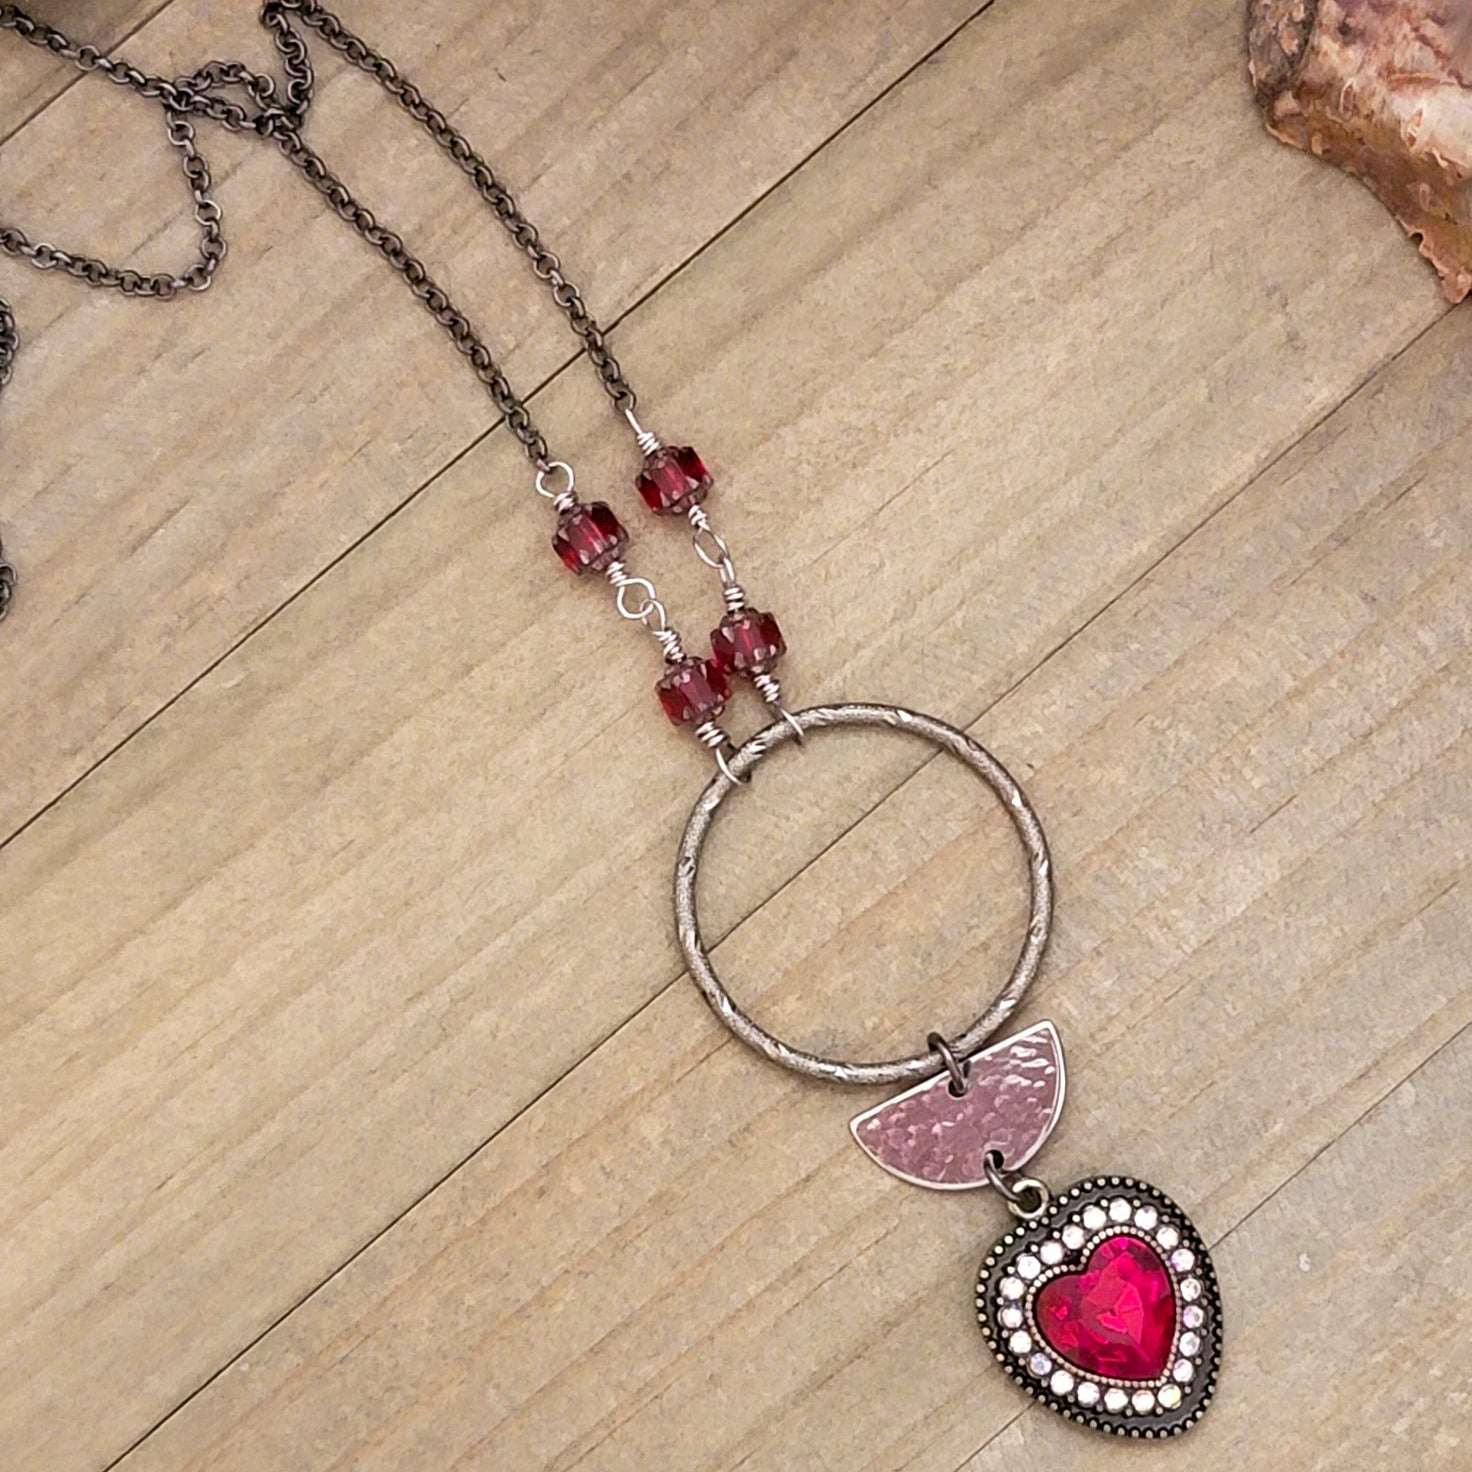 Red Crystal Heart Necklace, Nicki Lynn Jewelry 